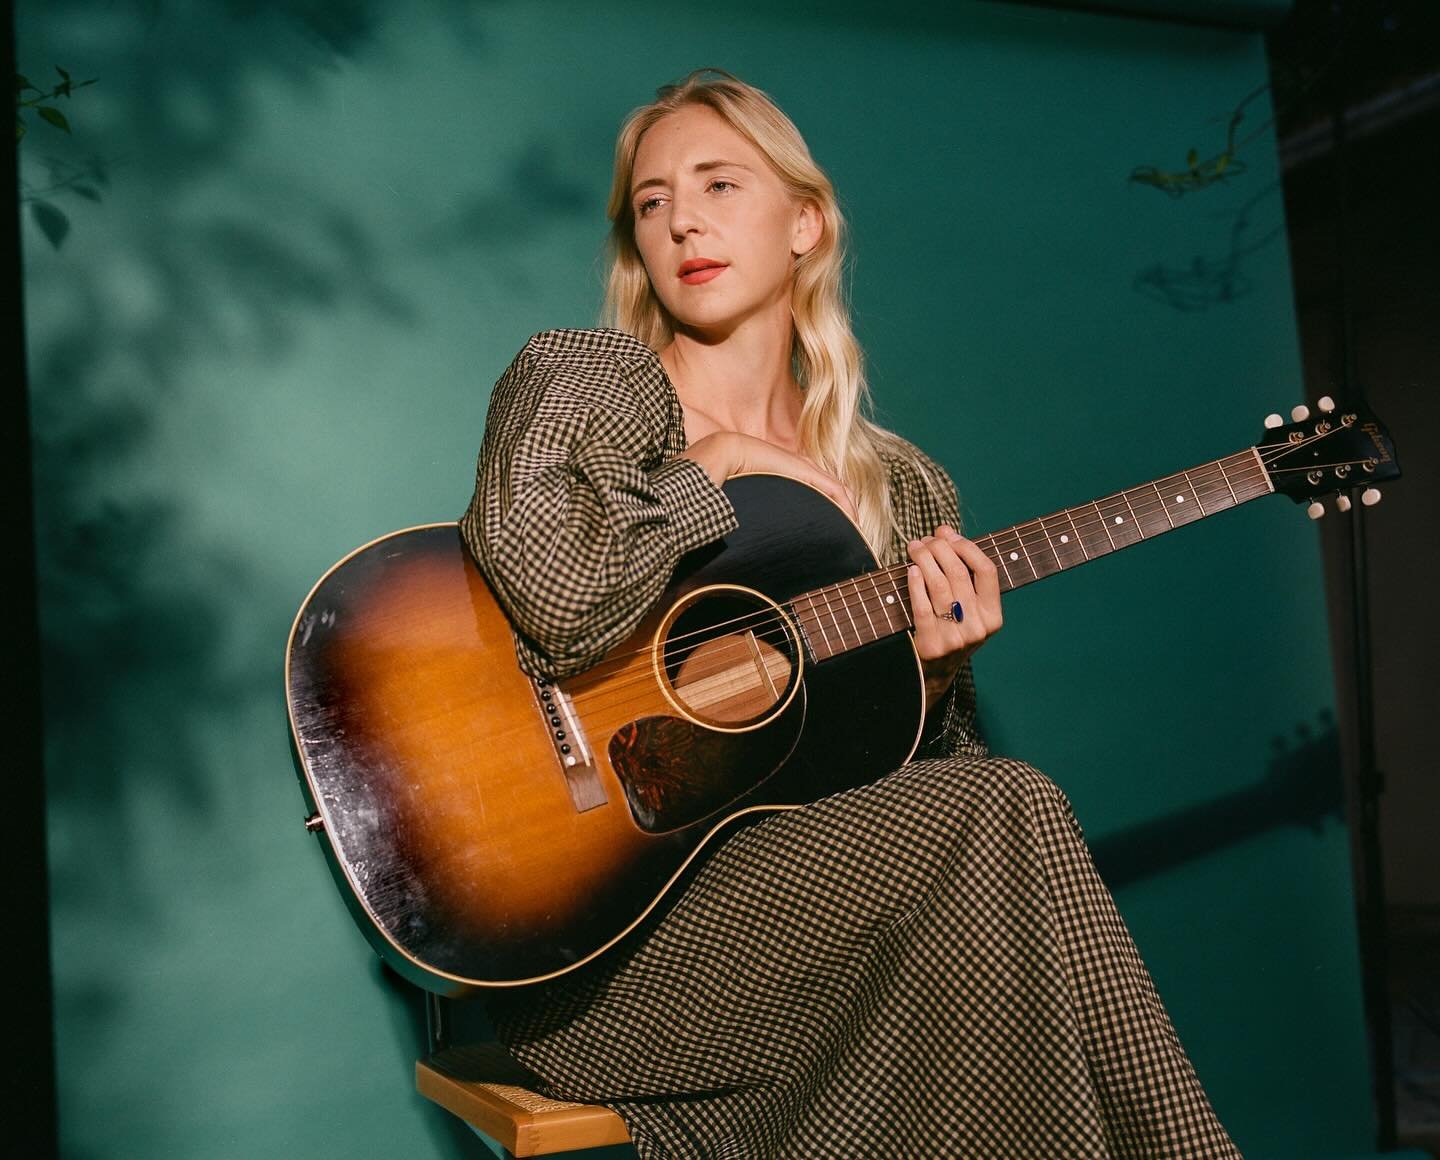 Finally tomorrow you&rsquo;ll also hear songs from @erisywatt . A brilliant songstress and skilled guitar player who also happens to know a lot about sea creatures 🌊🐟 We can&rsquo;t wait to see you tomorrow! Reserve your spot through the link in ou